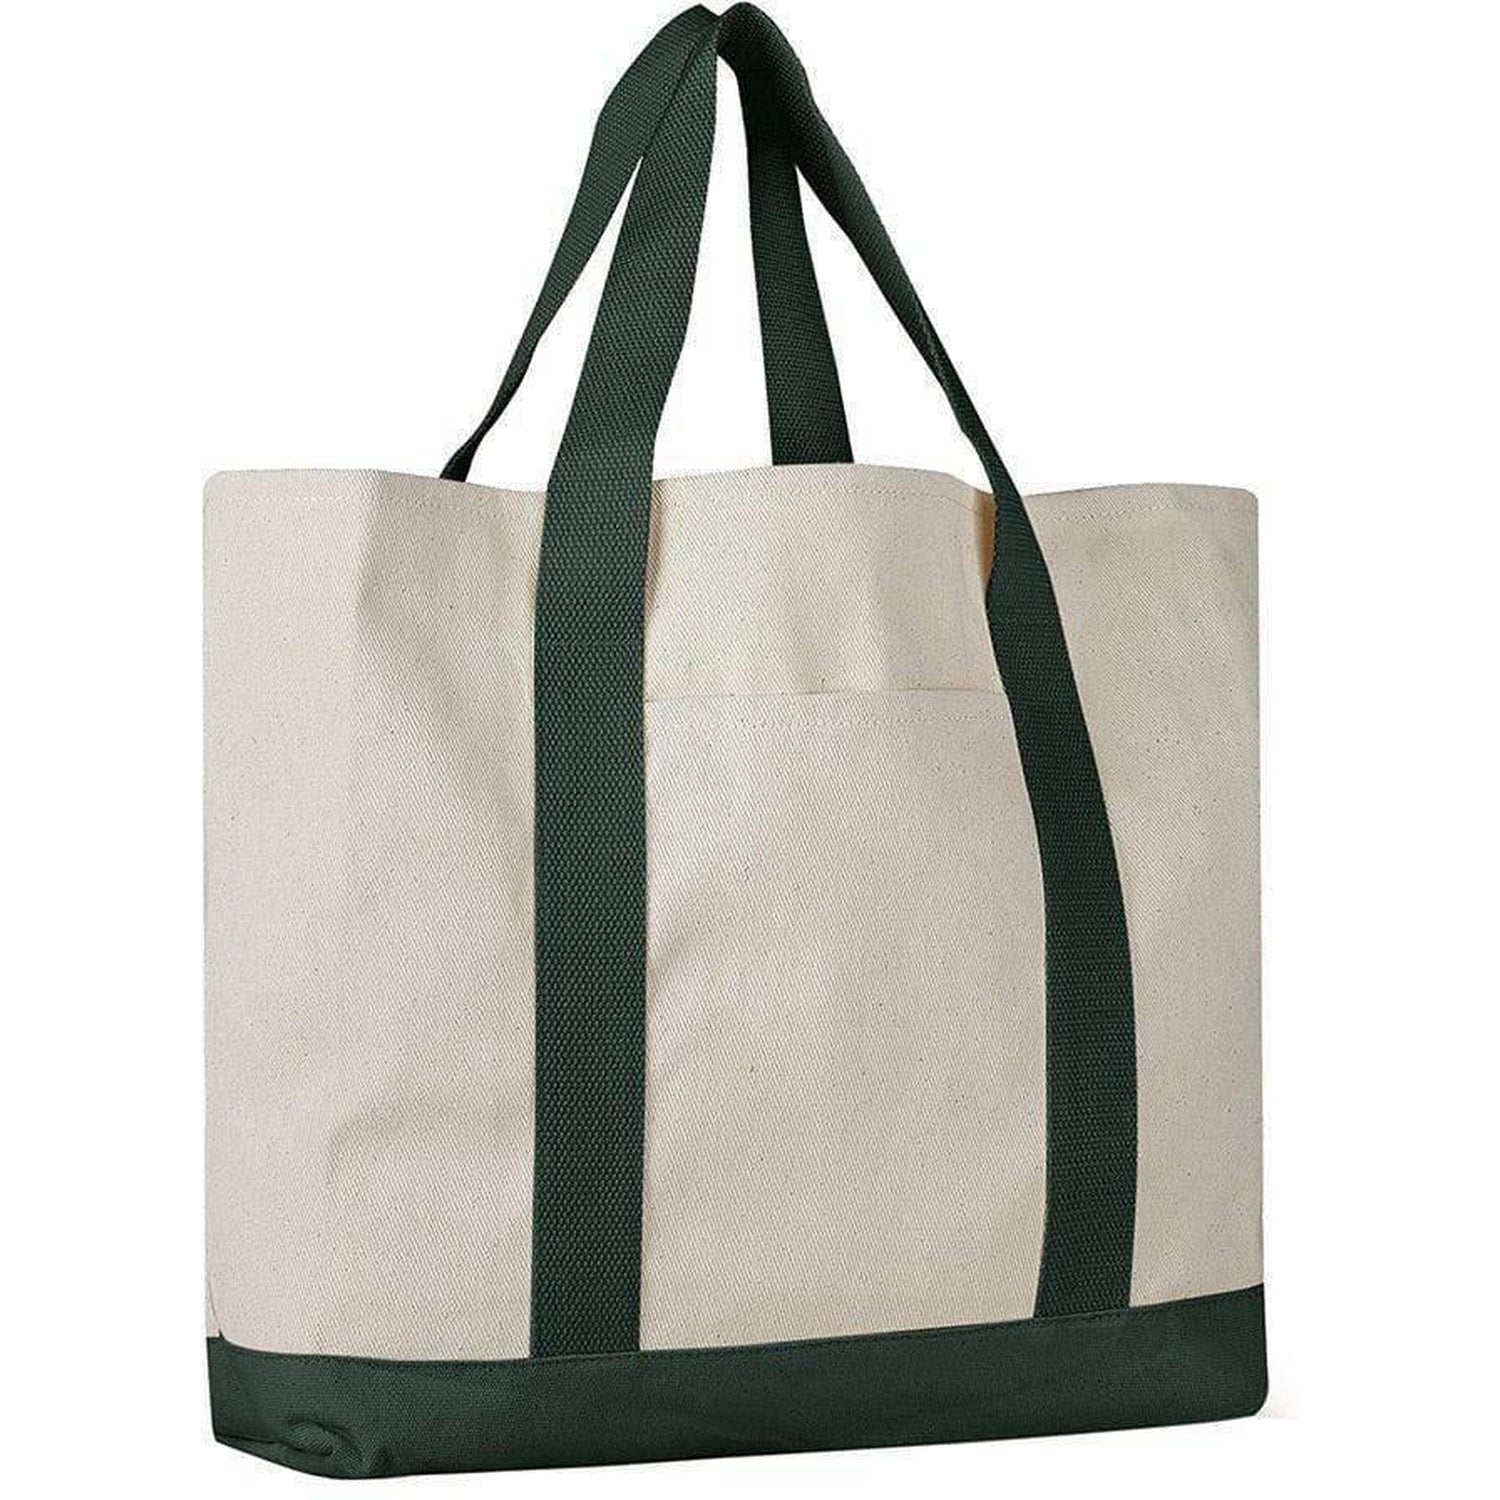 Heavy Cotton Canvas Large Size Sturdy Two-Tone Tote Bags - Single Bag